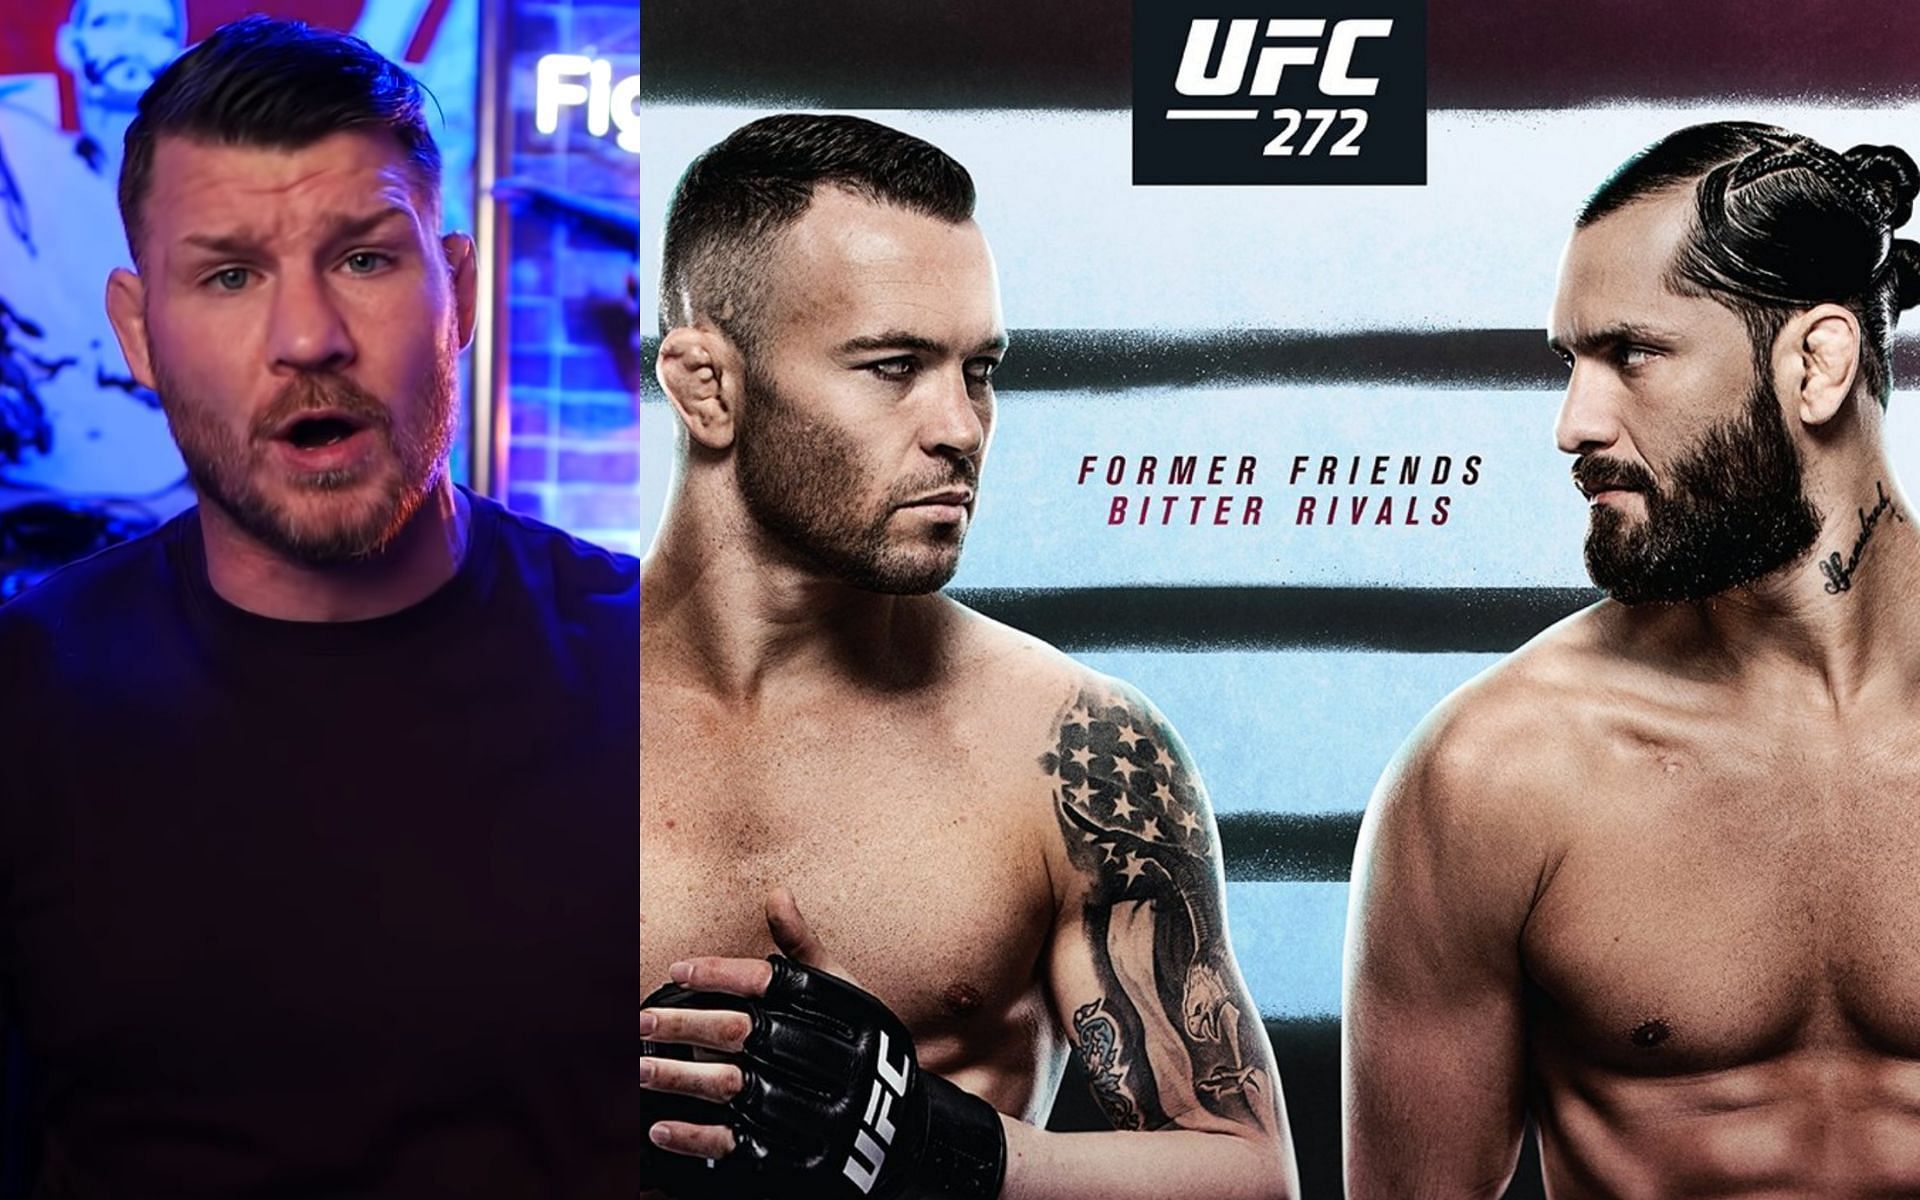 Michael Bisping(left) via YouTube/Michael Bisping; UFC 272 official poster(right) via Twitter/UFC